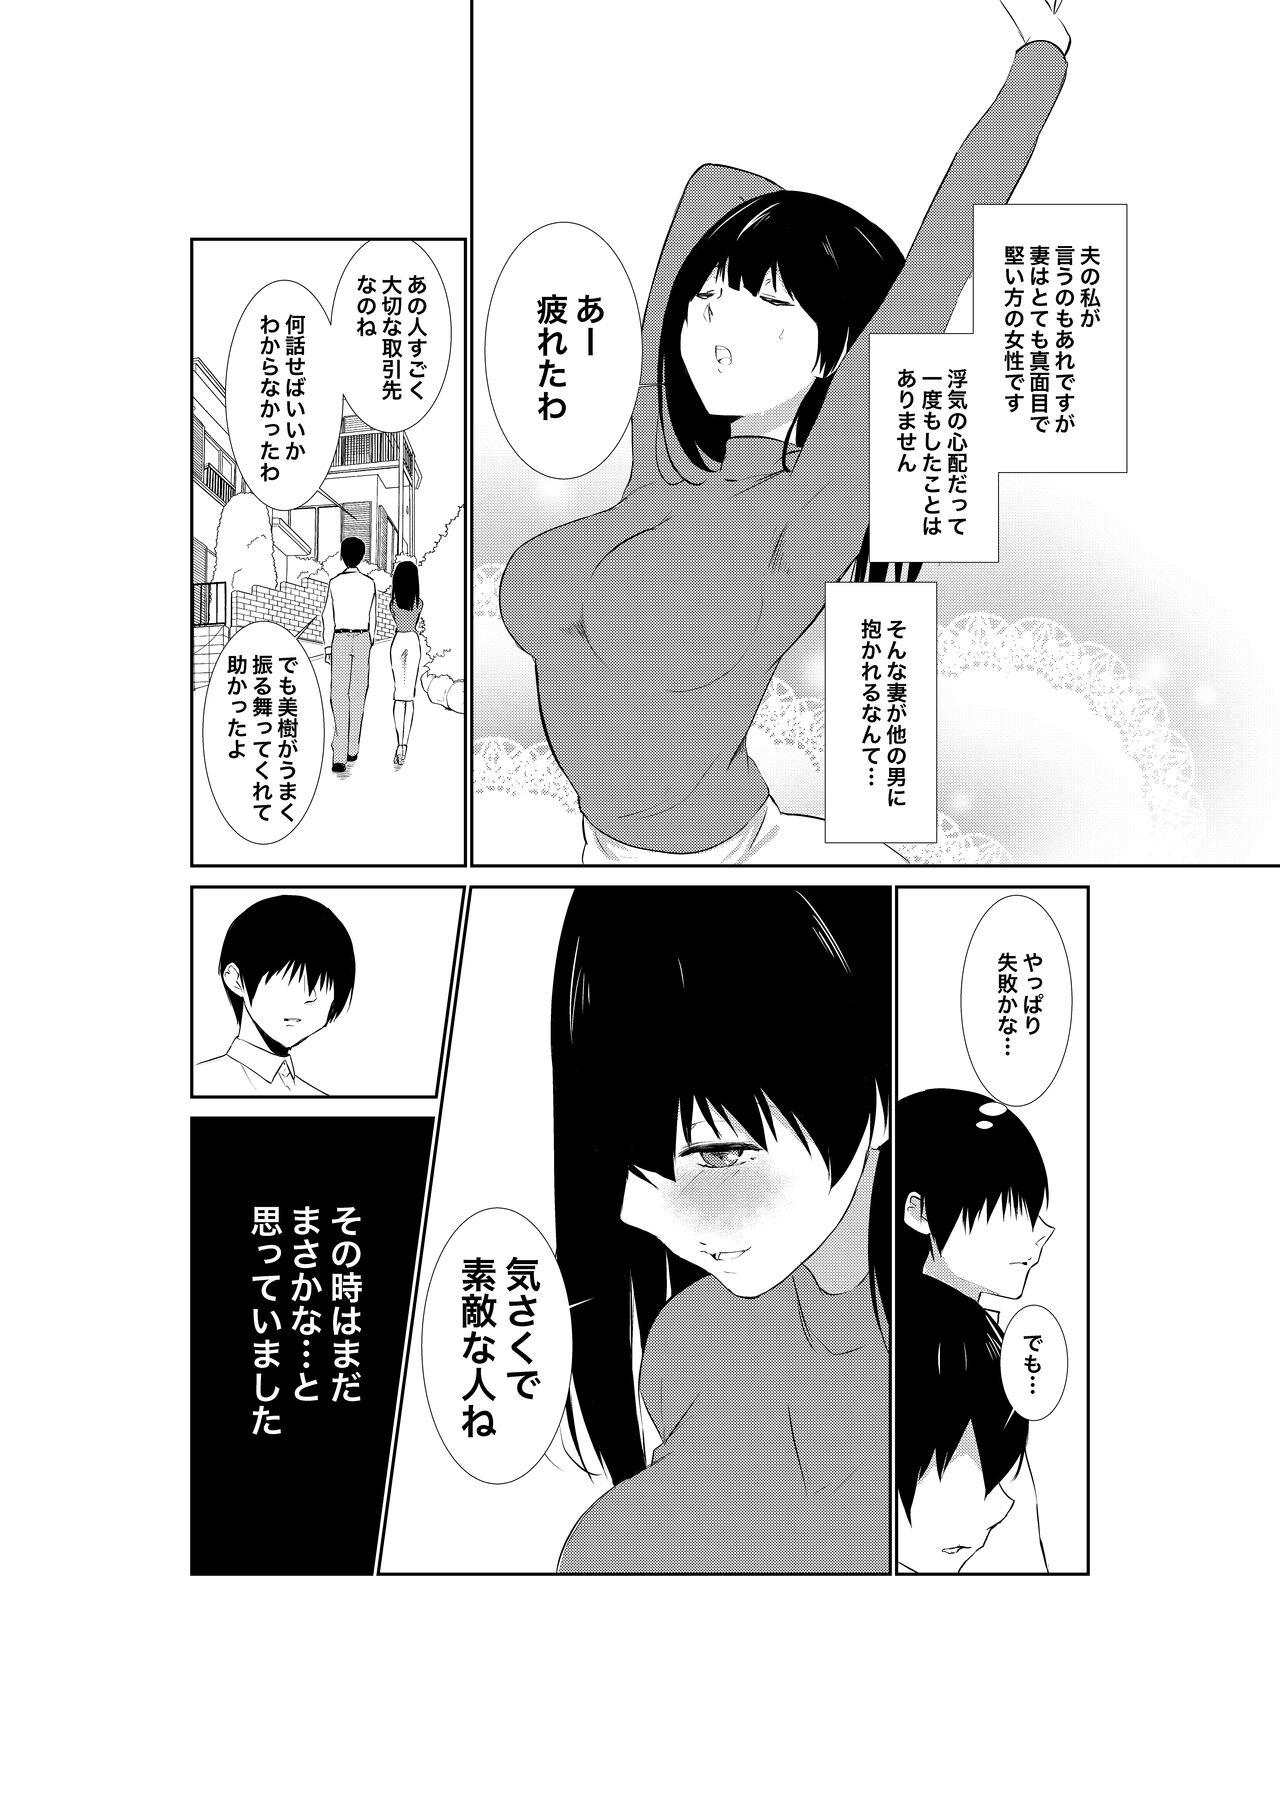 Married 妻が他人に堕ちるまで - Original Taboo - Page 8